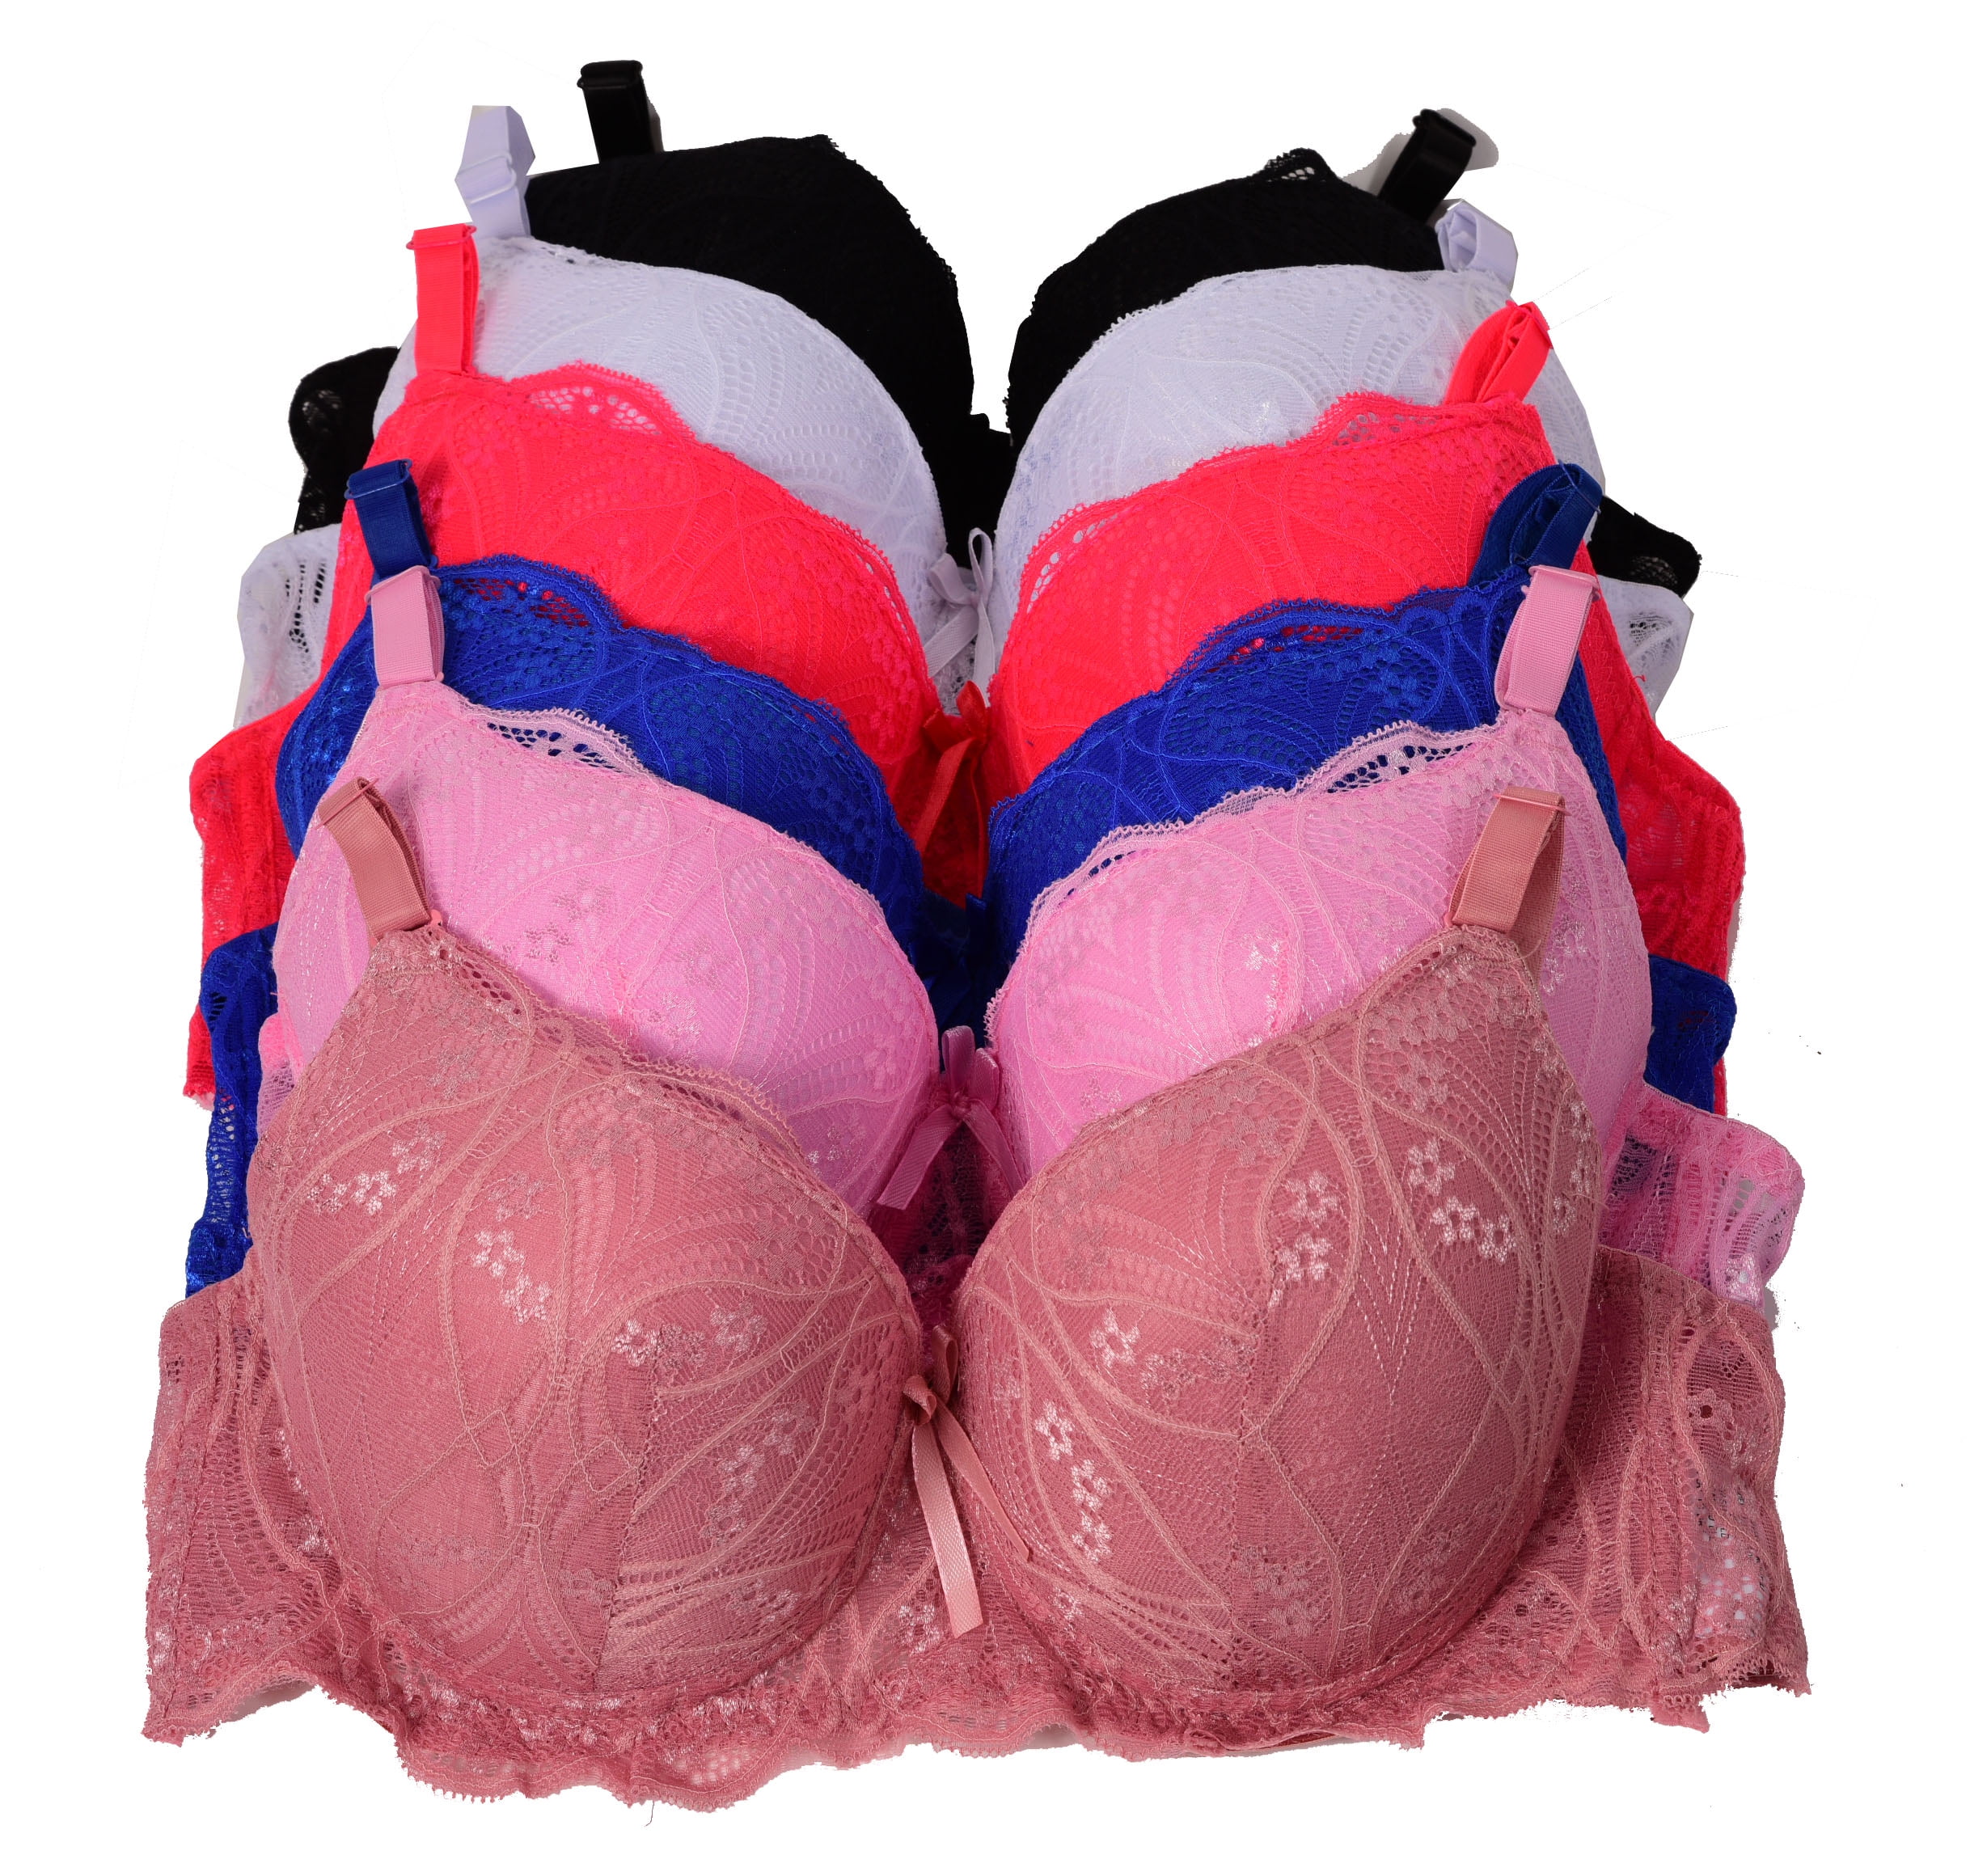 Women Bras 6 pack of Bra B cup C cup Size 36C (6667) 